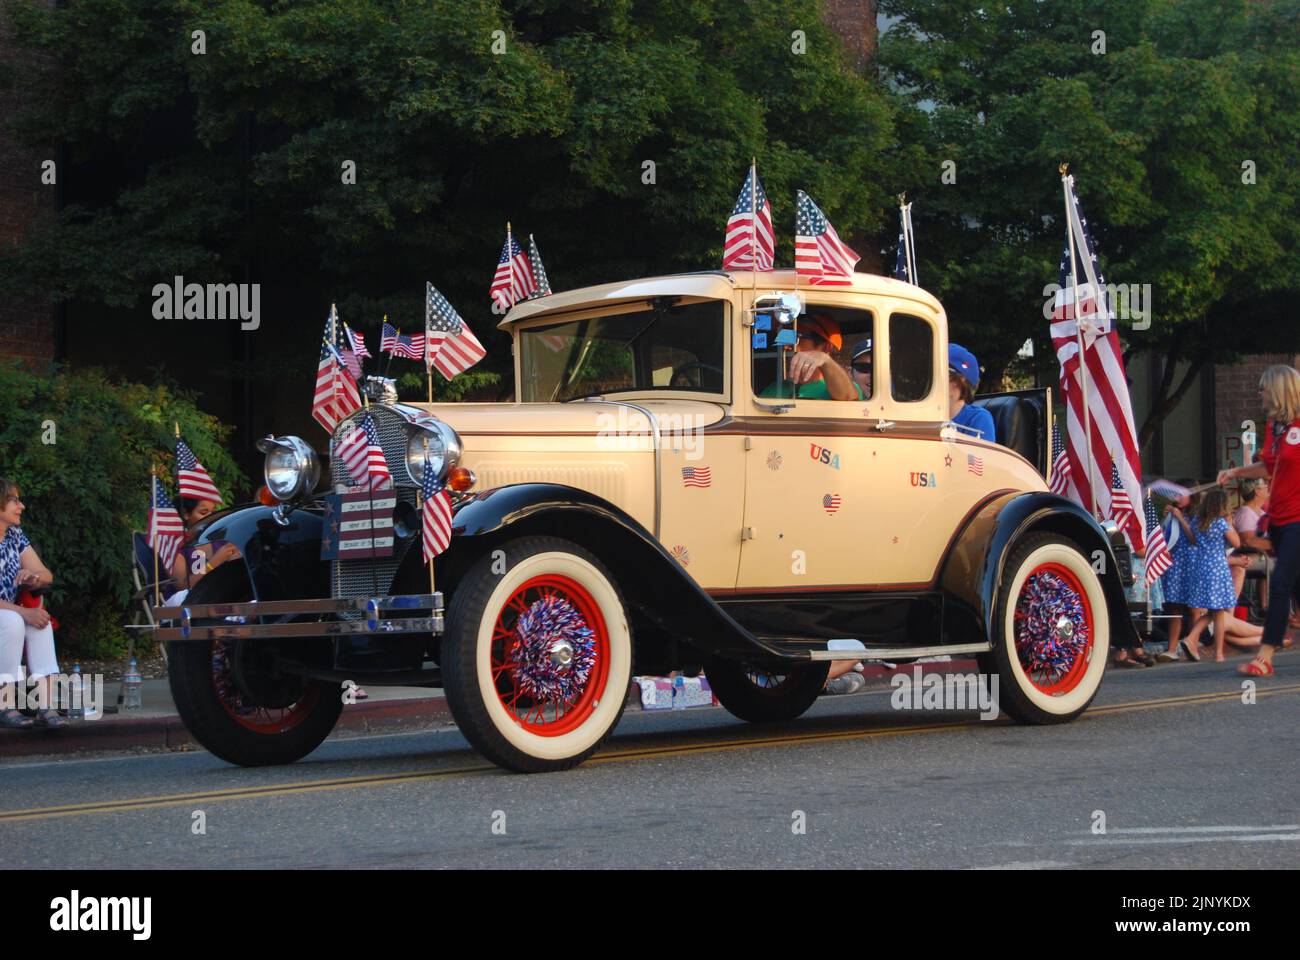 A 1930 Ford Model A Rumble Seat Coupe decorated with Stars & Stripes flags in an Independence Day 4th July parade in Auburn, CA. Stock Photo